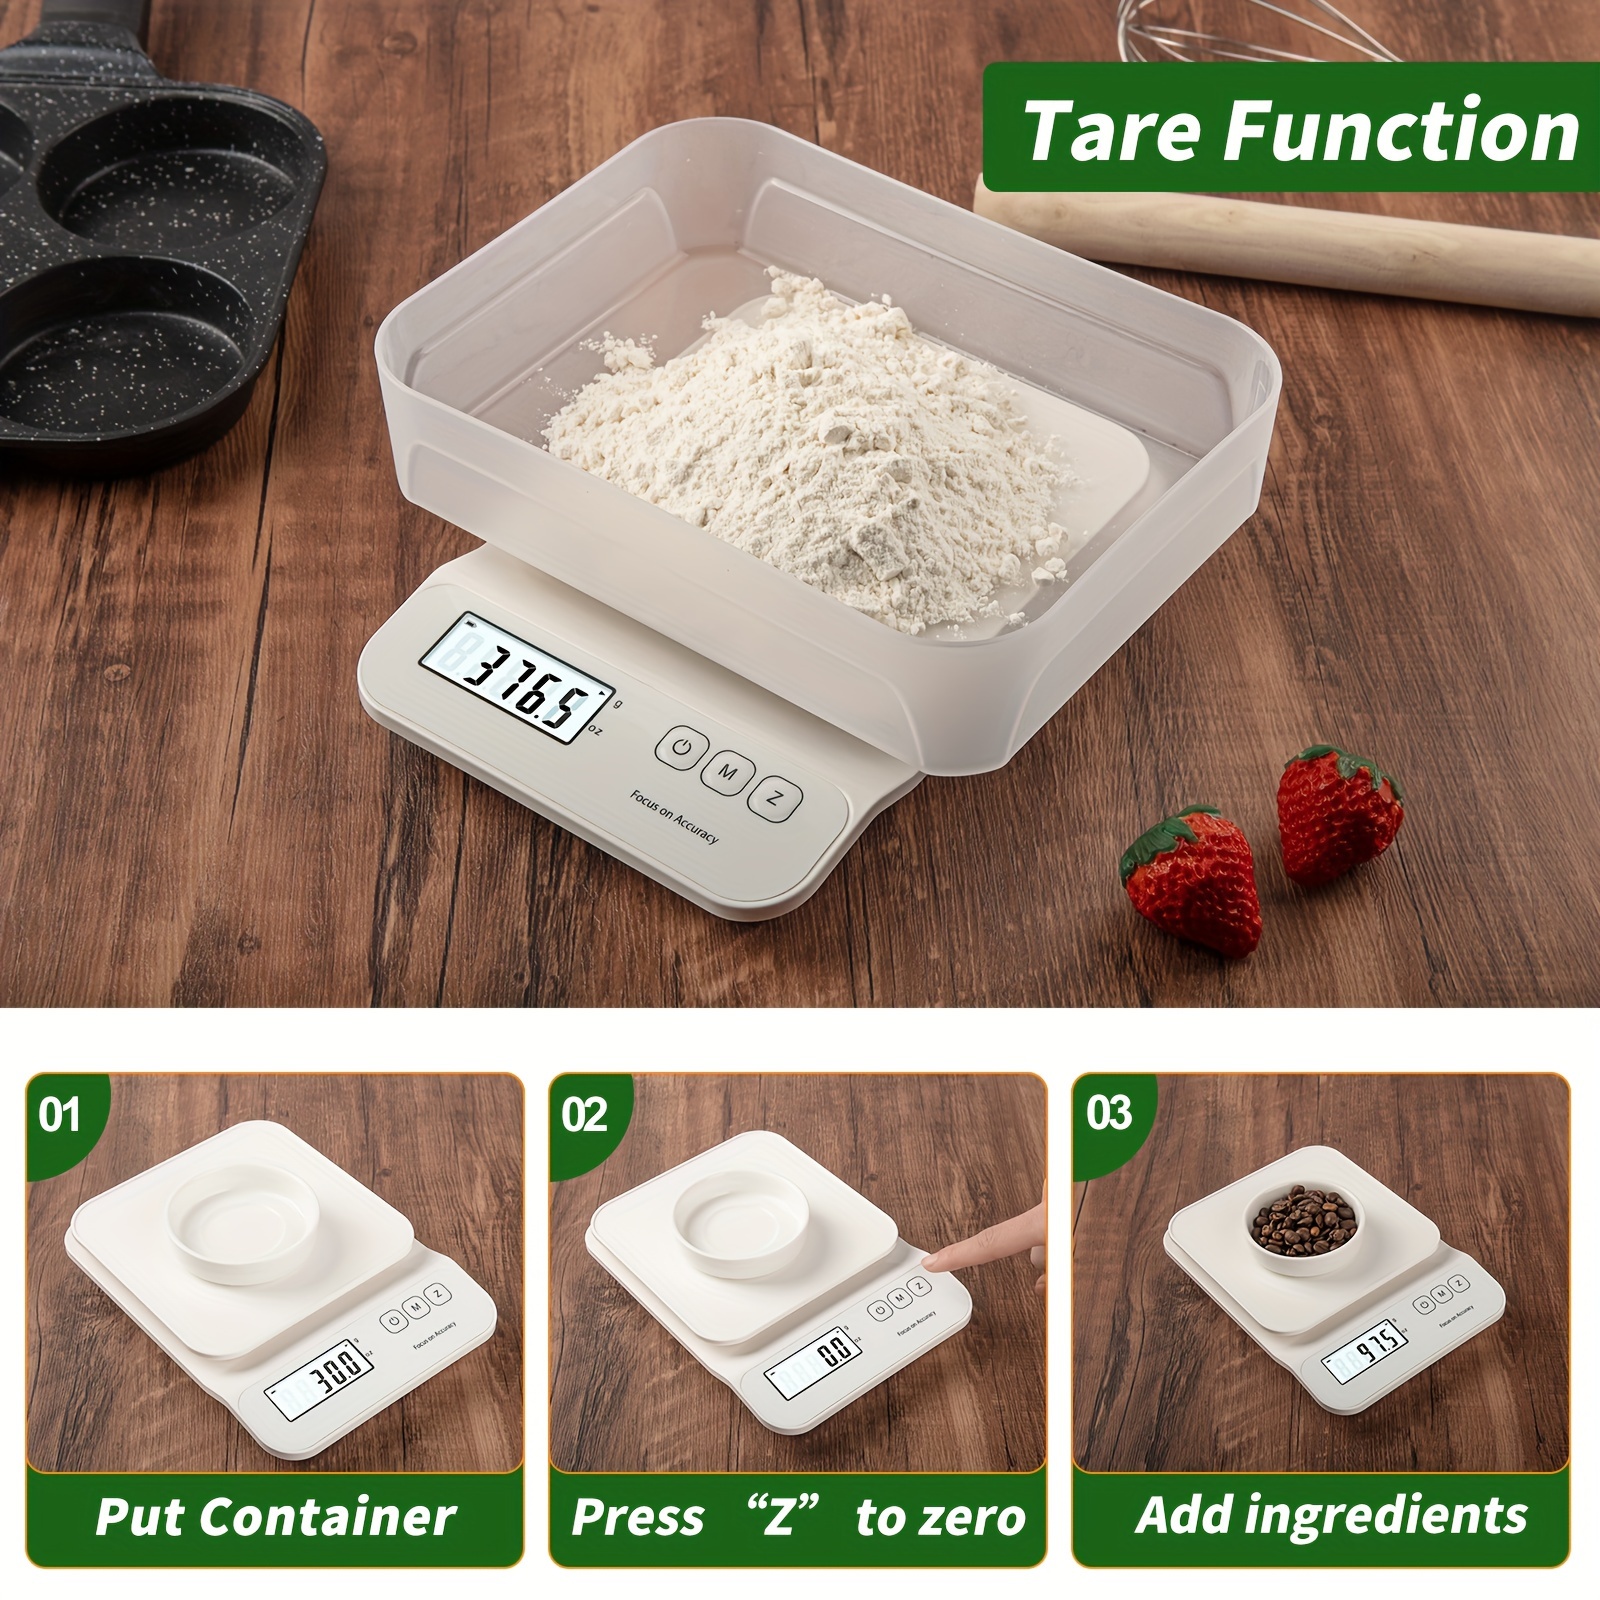 Digital Kitchen Scale, Portable Food Scale With Removable Tray, Small Scale  With Tare Function, Gram And Ounce Scale For Cooking, Meal Prep, Coffee,  Jewelry, Kitchen Weighing Scale